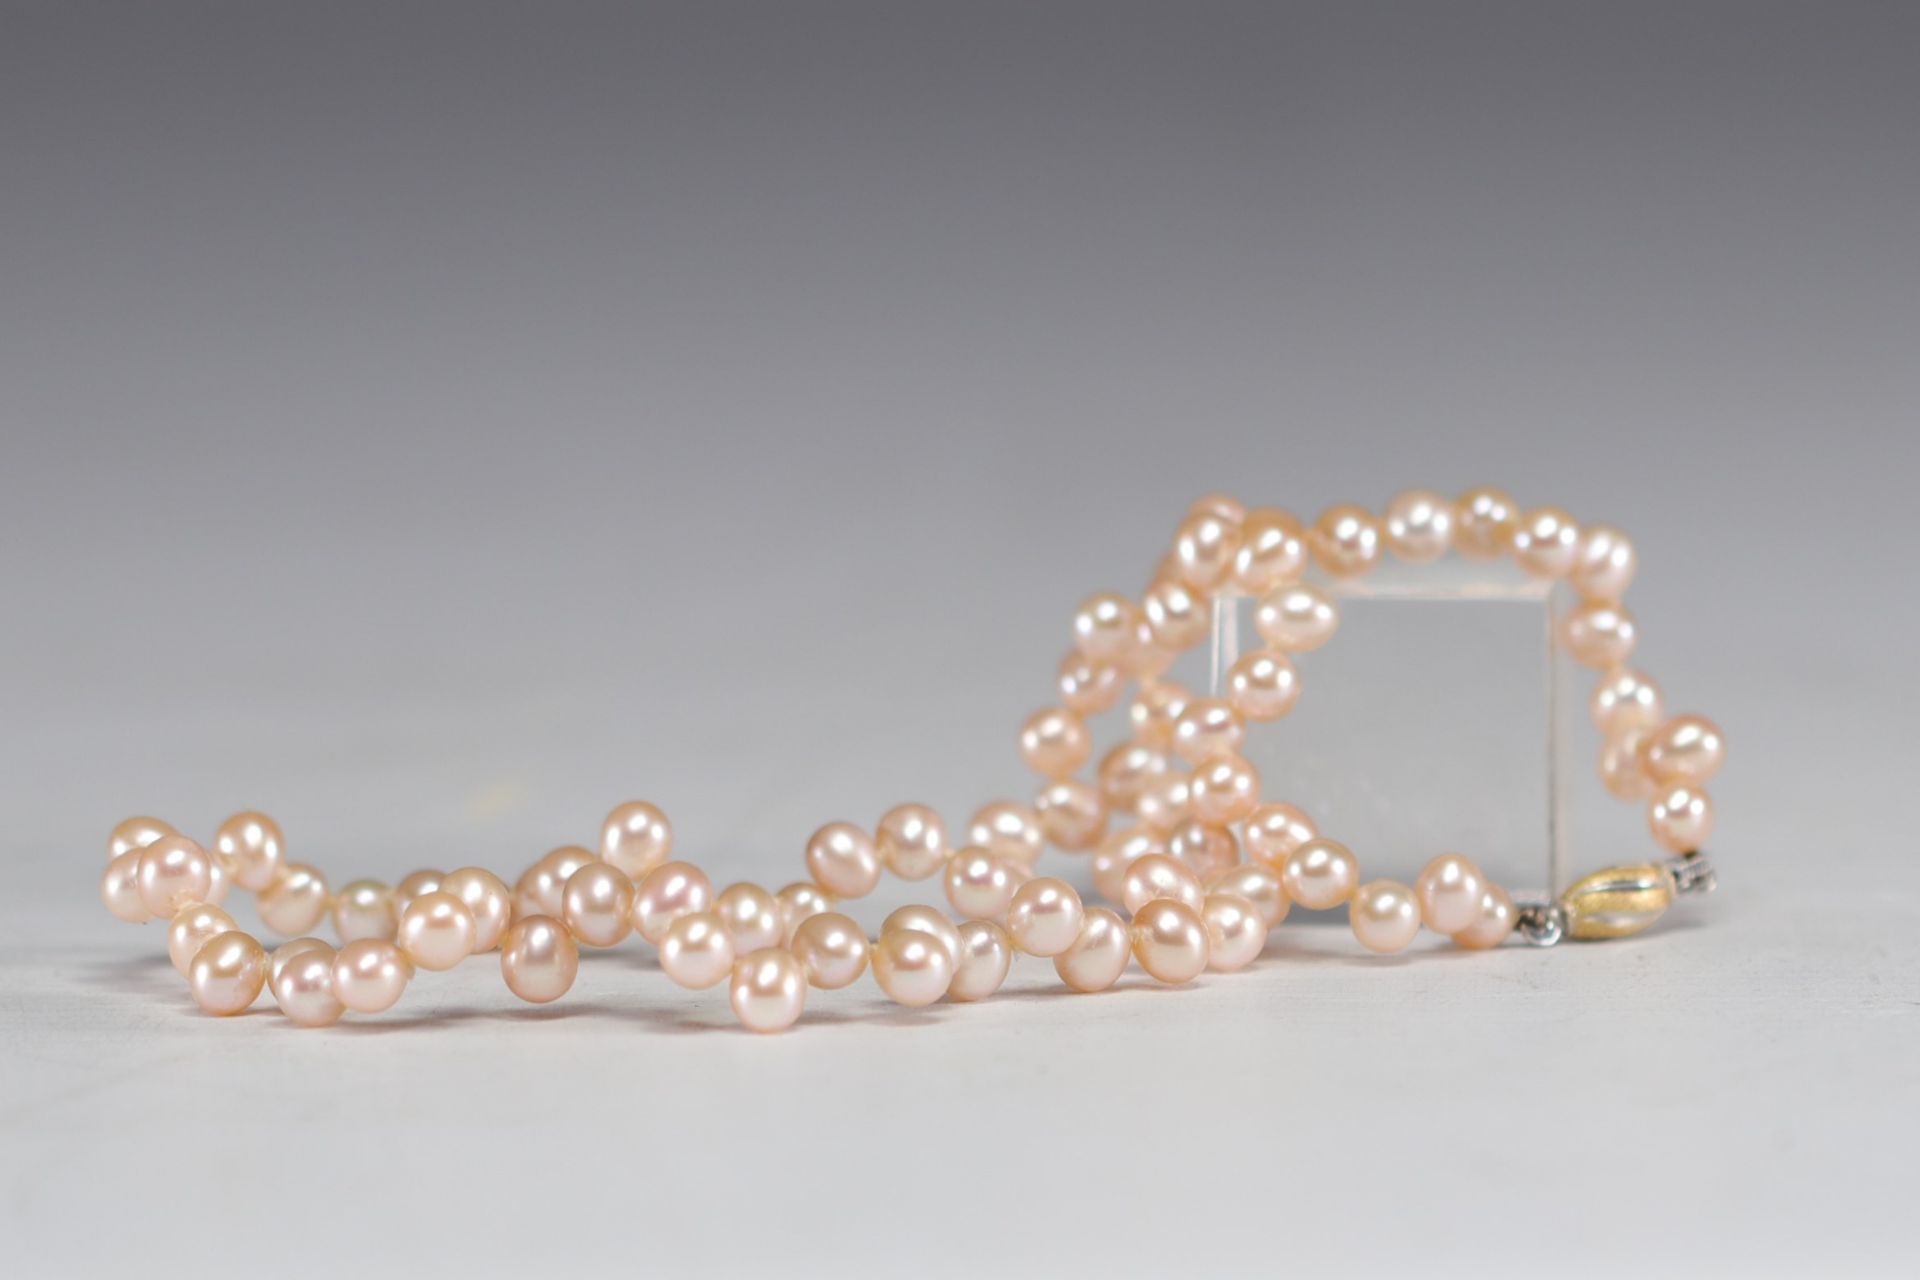 Pink pearl necklace with a clasp made of 18k gold. - Image 2 of 2